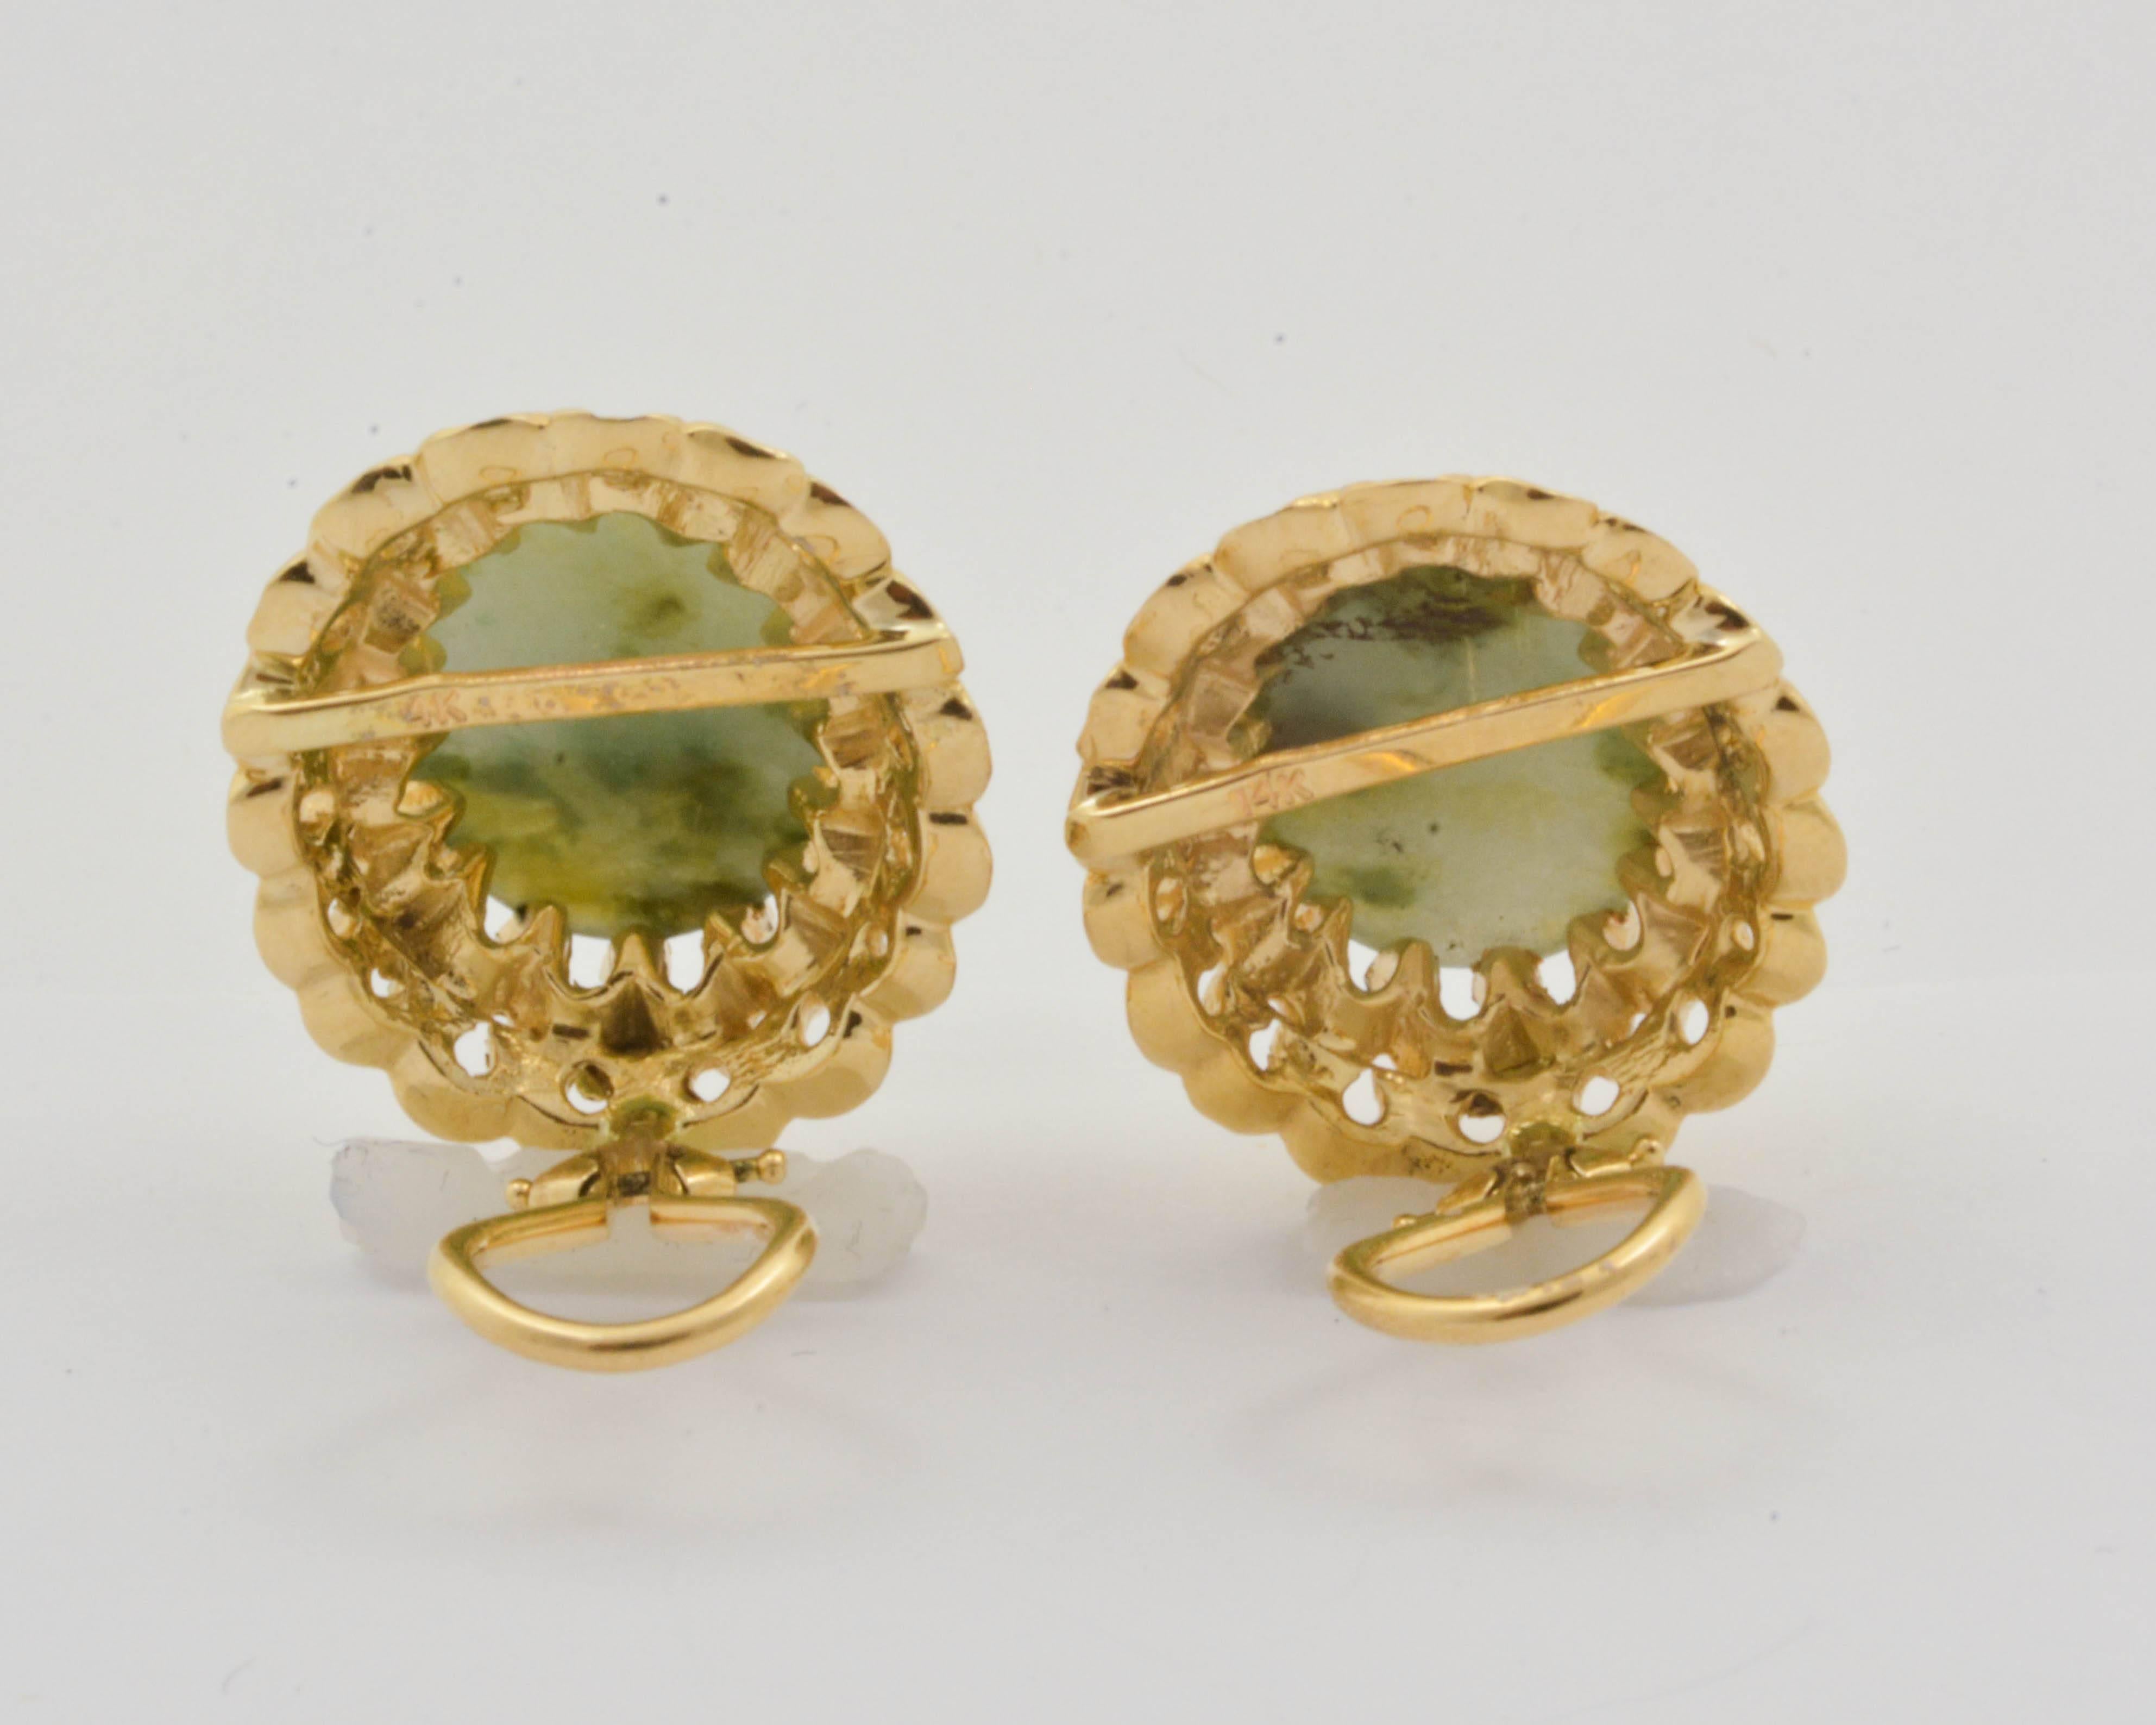 An exotic pair of variegated, cabochon-cut jade stones is displayed in lovely 14kt yellow gold in these clip-on earrings. The gold is fashioned to resemble ruffles. Each jade is set with scalloped prongs, adding detail and beauty to the unique